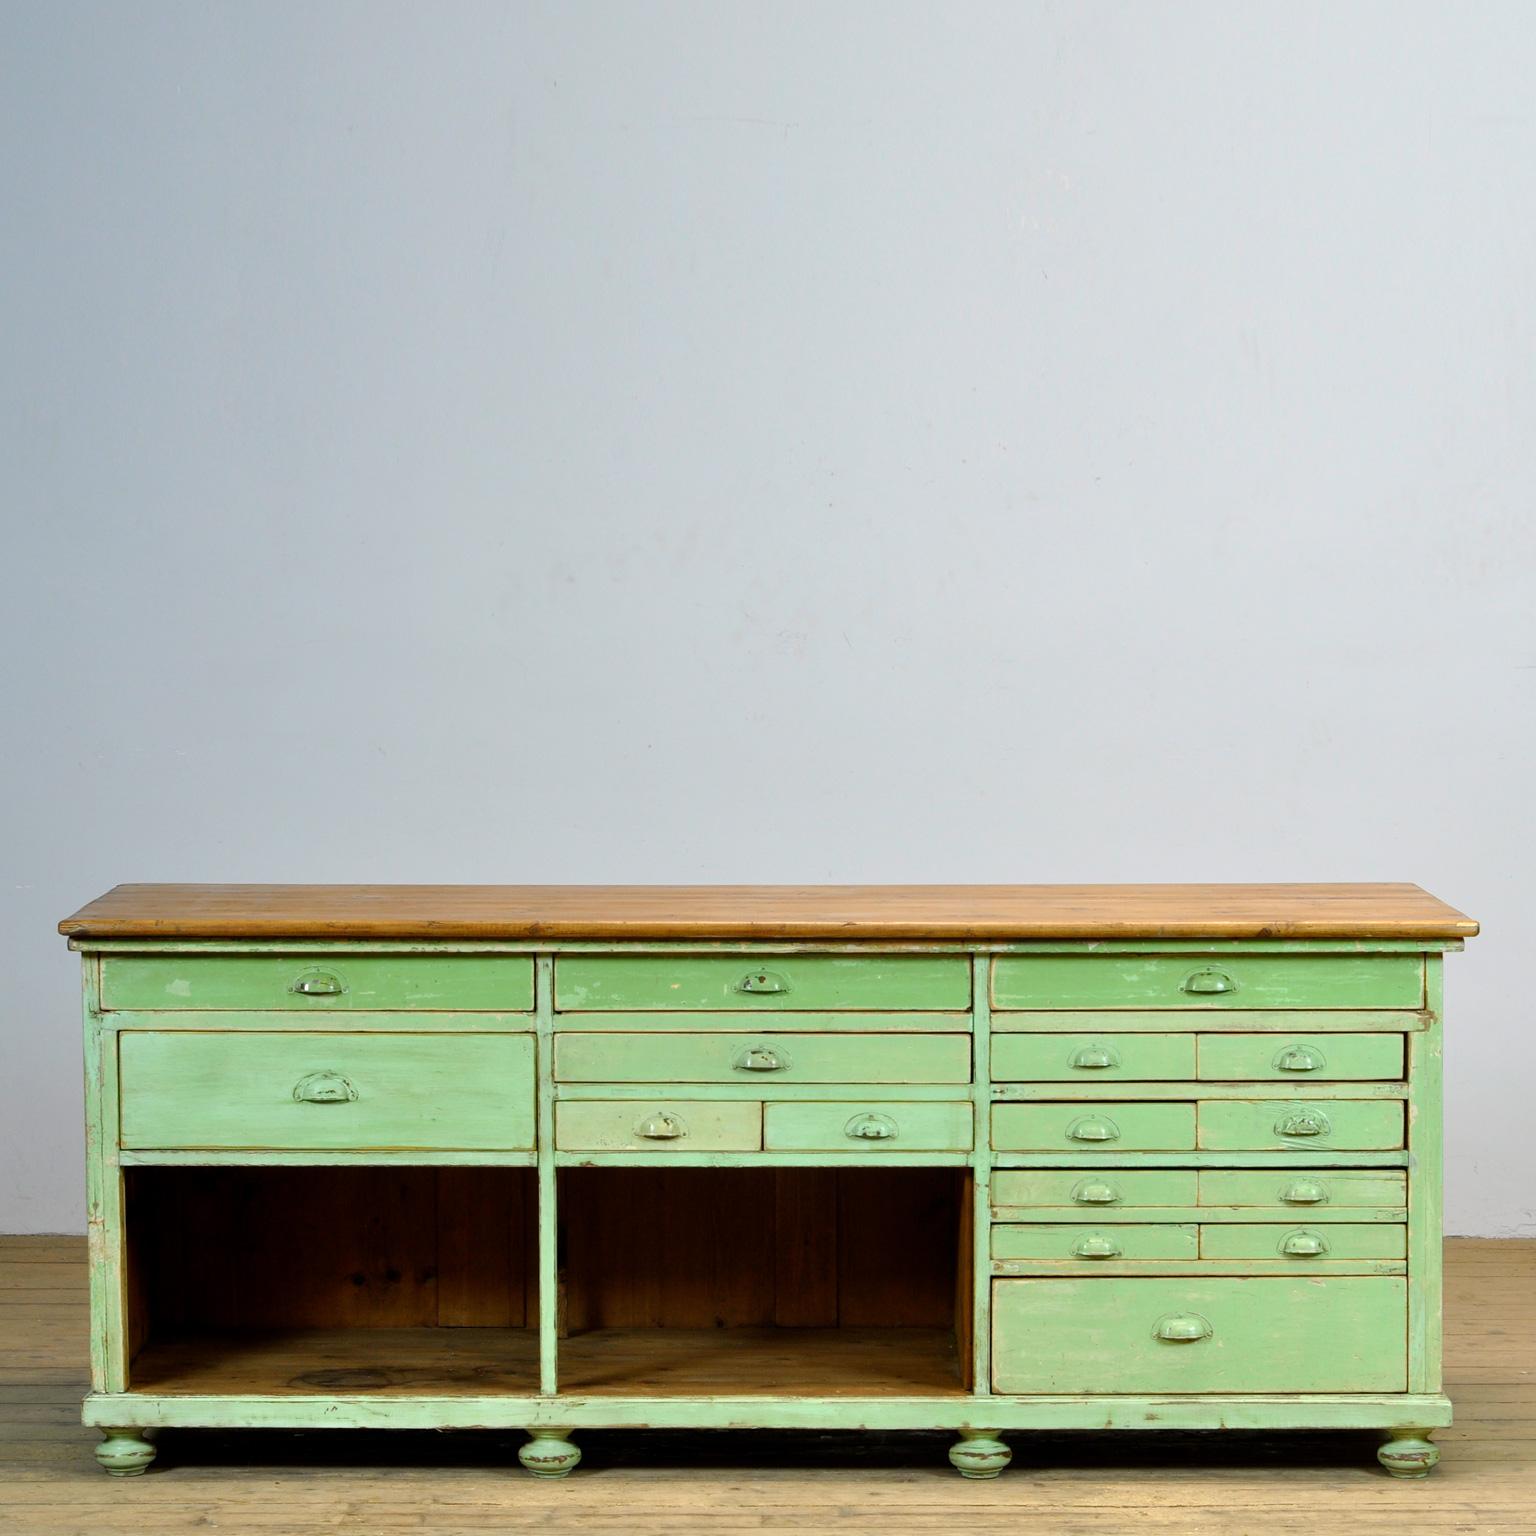 Pine work table from the 1930s. The table has 16 drawers of different sizes. The top three drawers are divided into compartments. The drawers are all made with dovetail joints. Original paint.
Can be used, for example, as a sideboard or as a